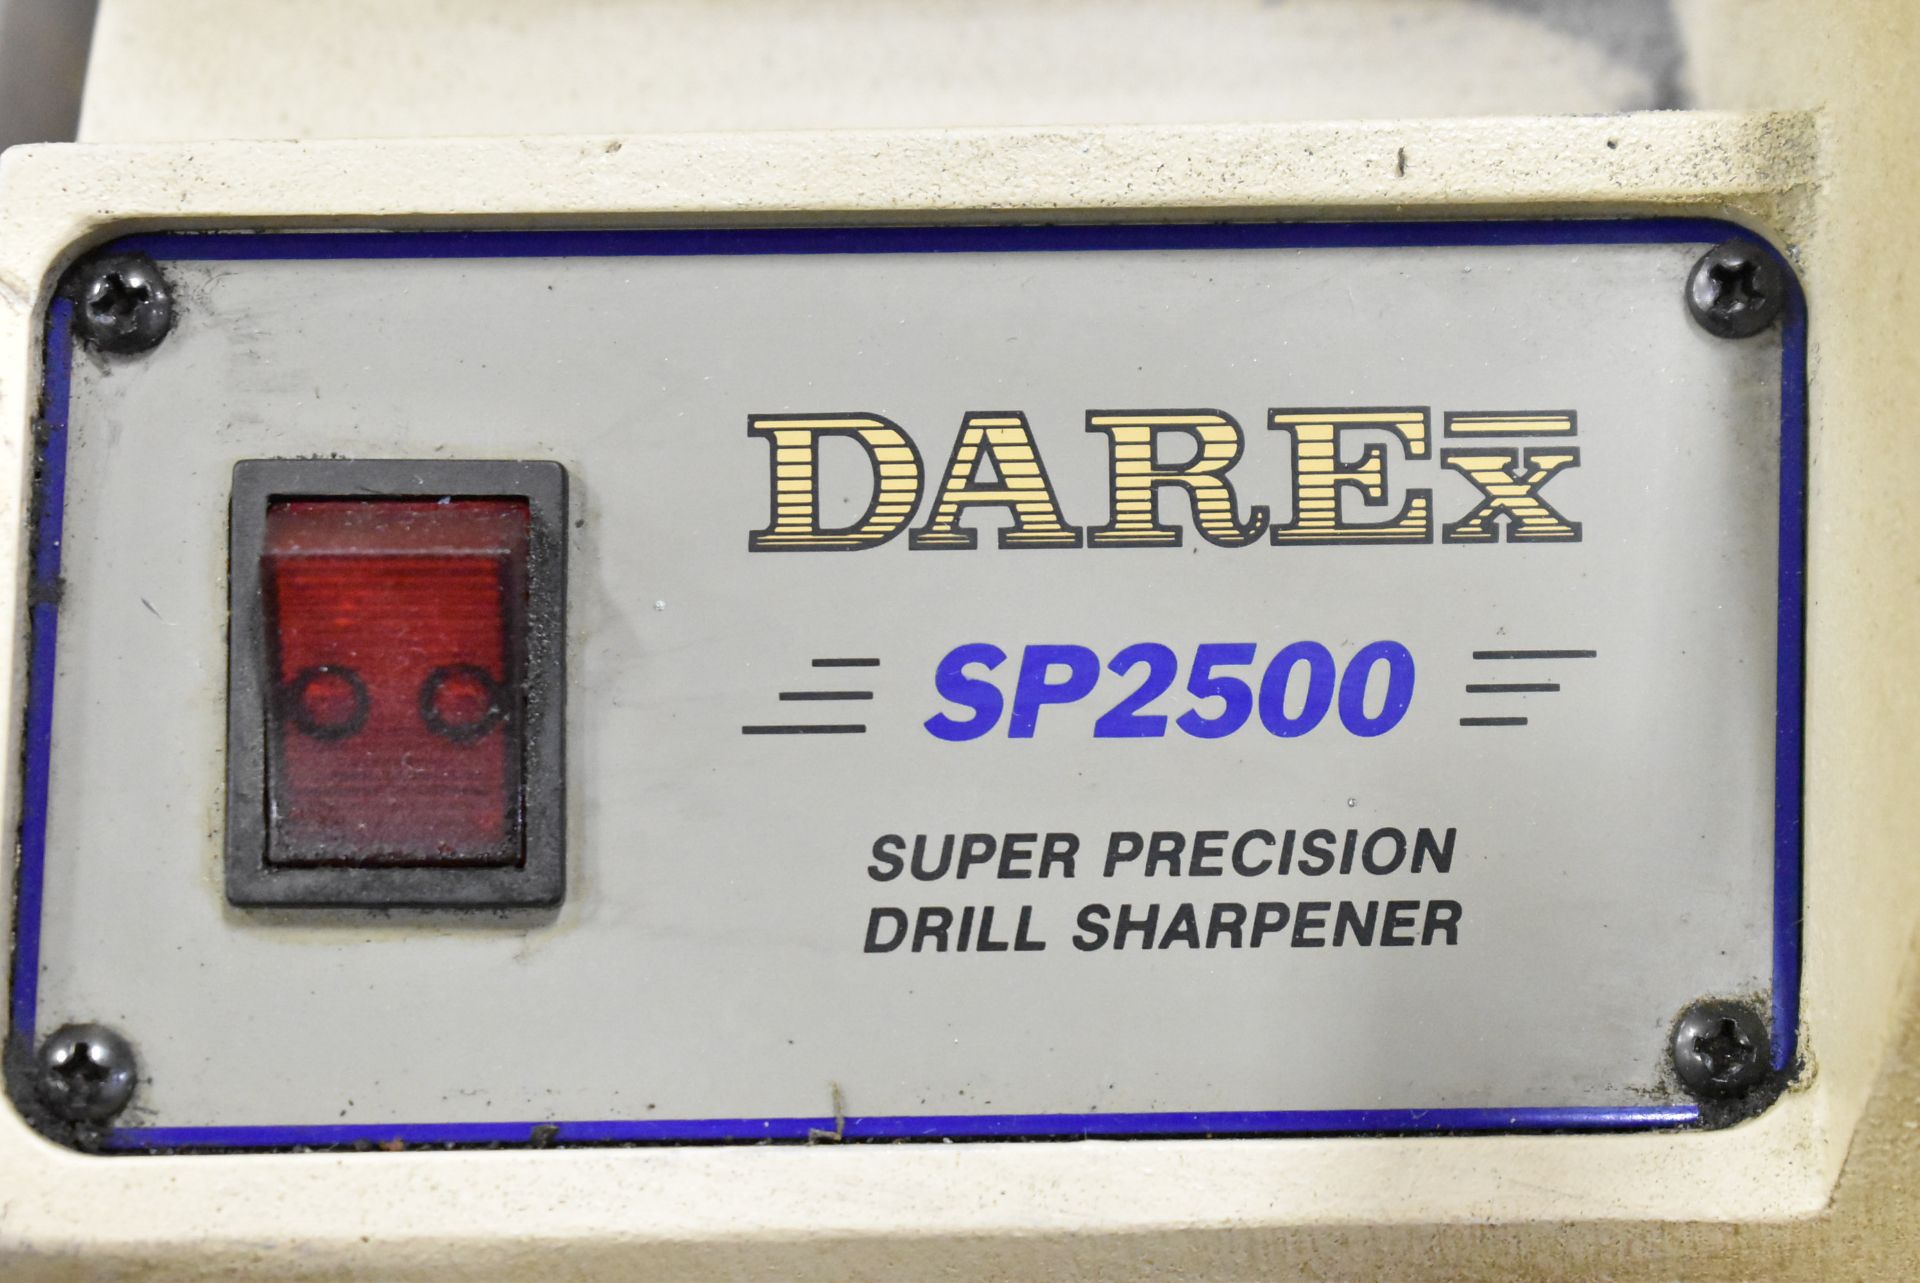 DAREX SP2500 SUPER PRECISION DRILL SHARPENER WITH 1/4 HP MOTOR, S/N 250549 - Image 3 of 4